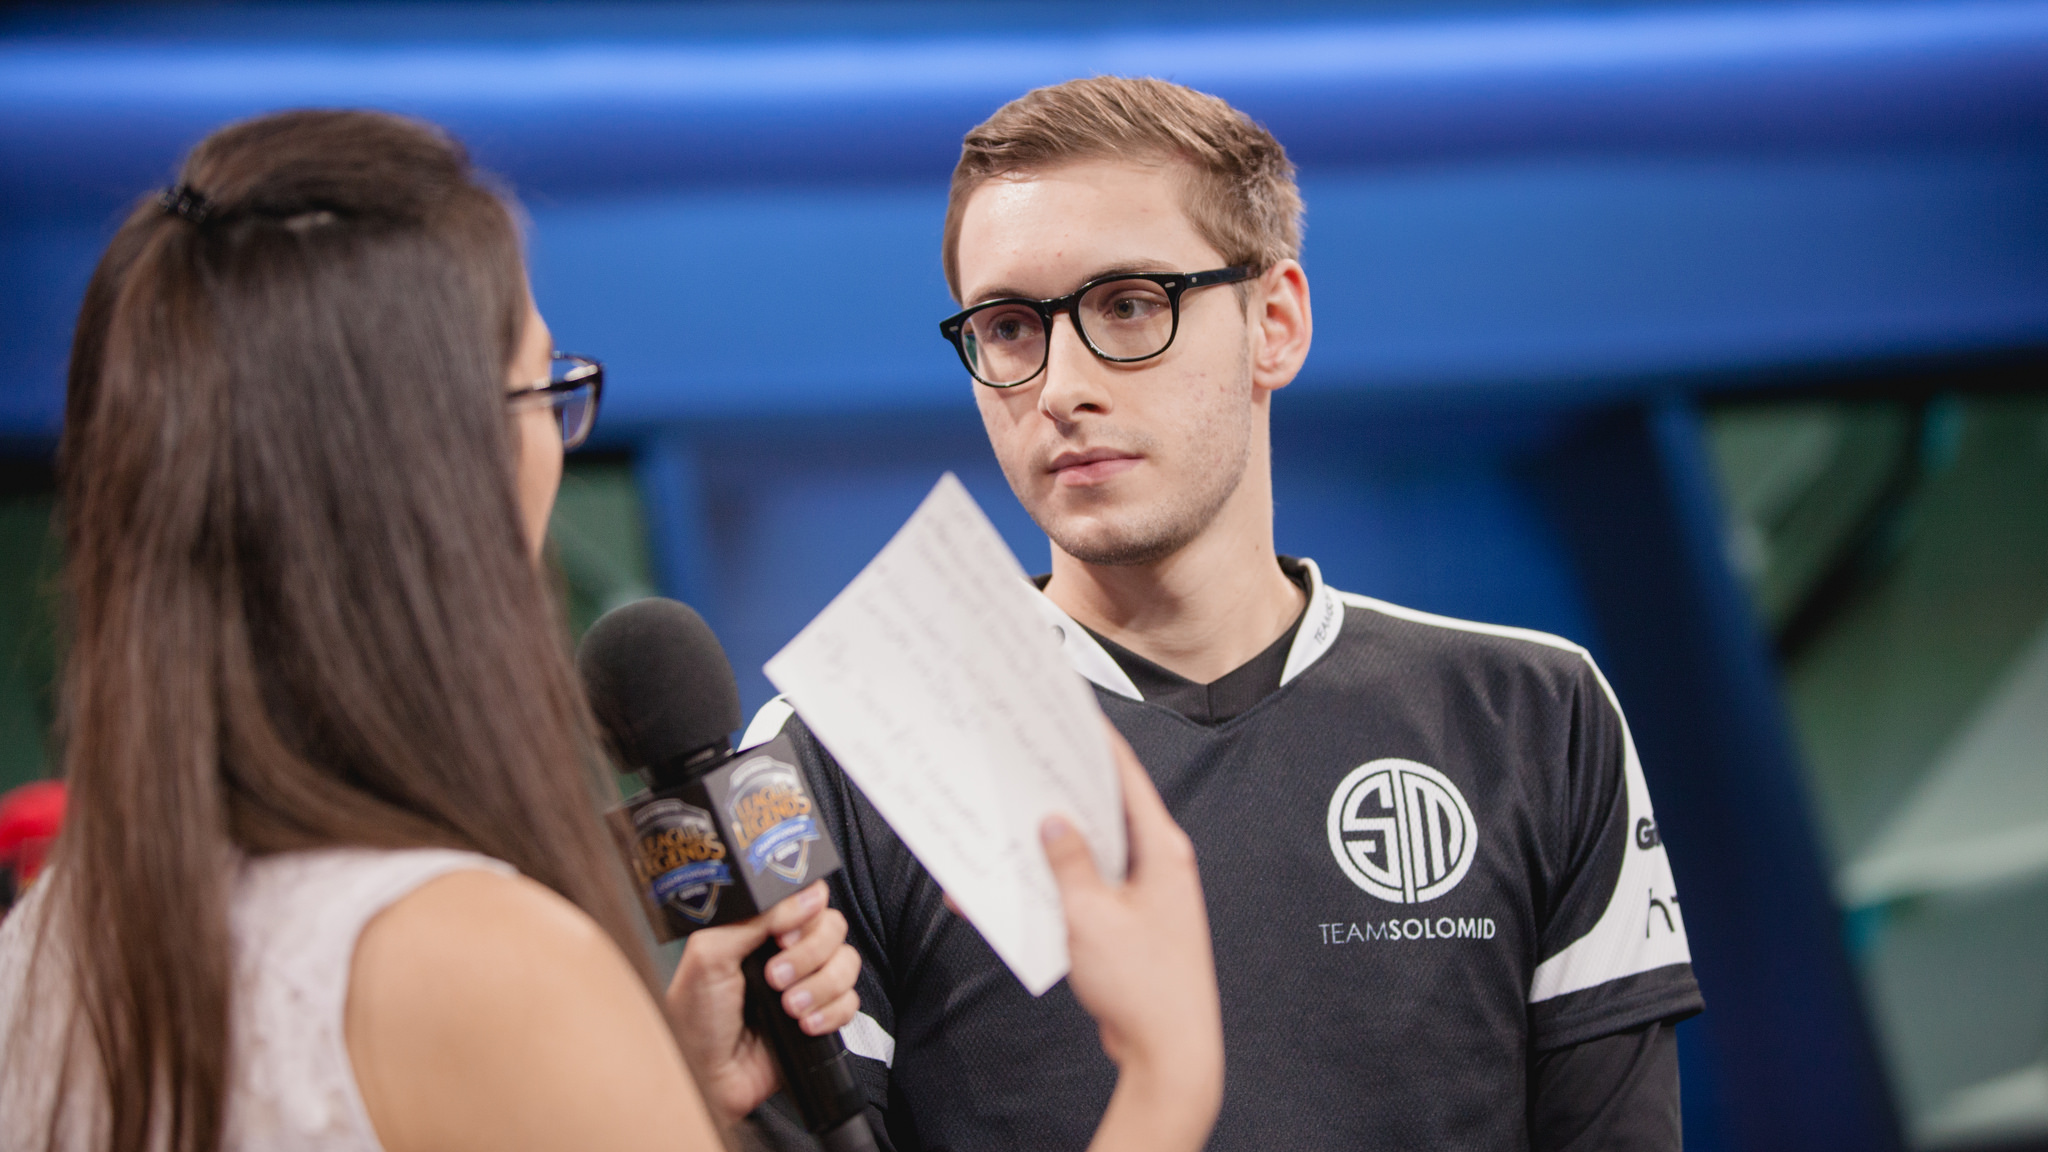 Bjergsen and TSM crush CLG’s playoff hopes by destroying the Golden Guardia...